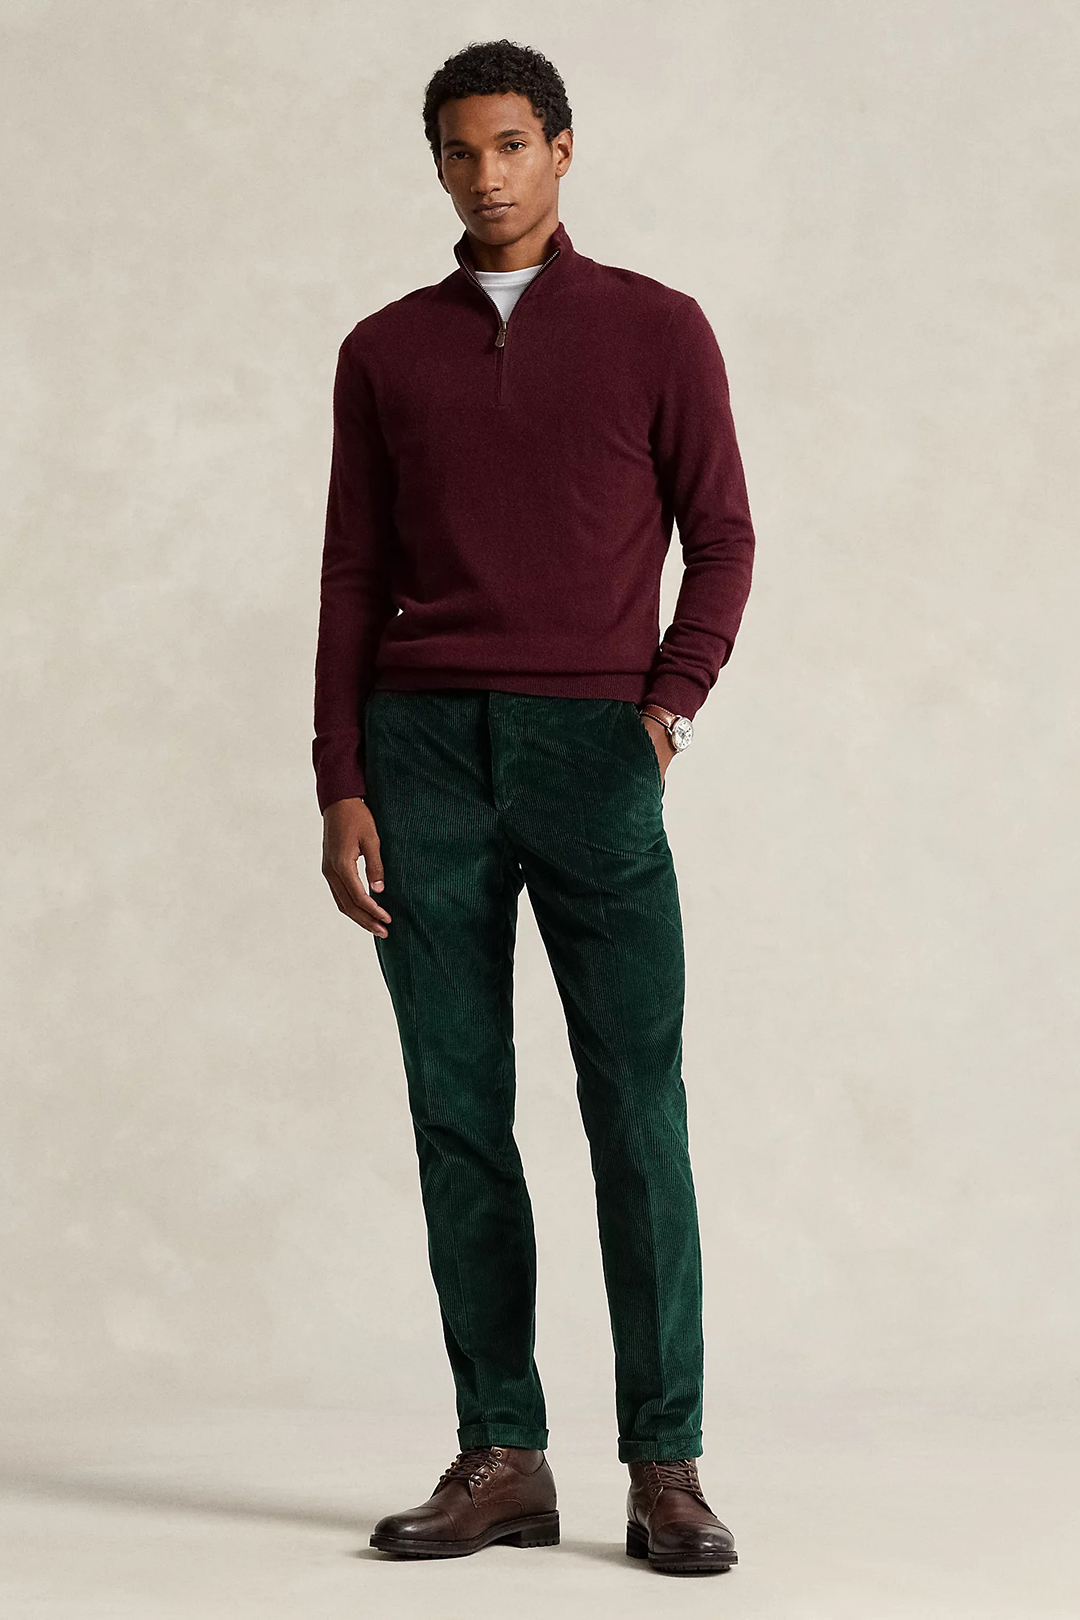 Burgundy zip neck sweater, corduroy trousers, and brown lace-up boots outfit